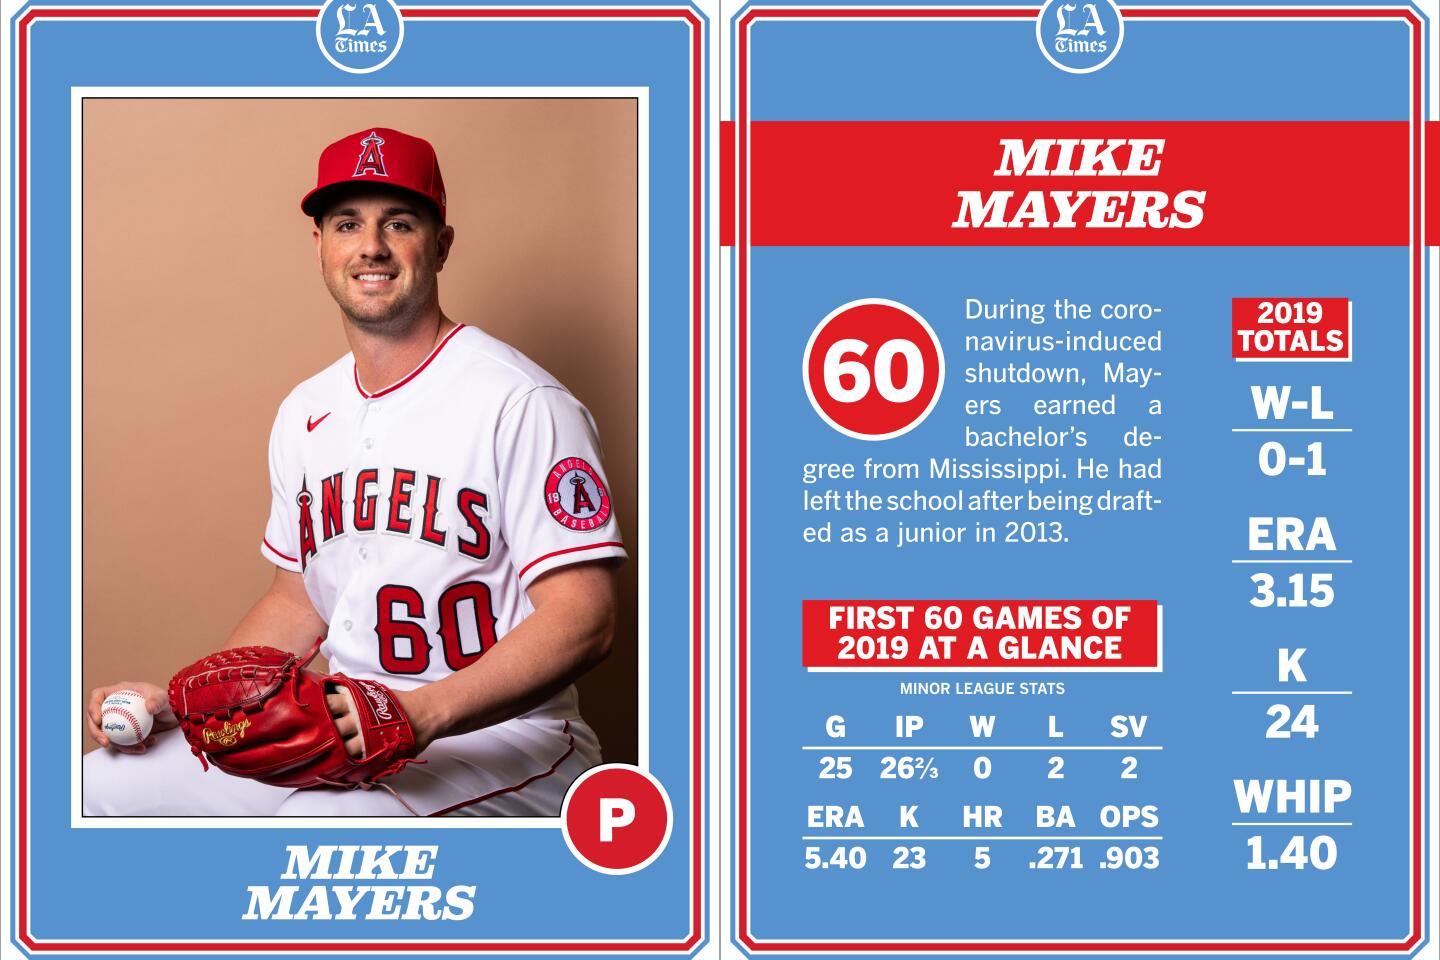 Mike Mayers, Angels 2020